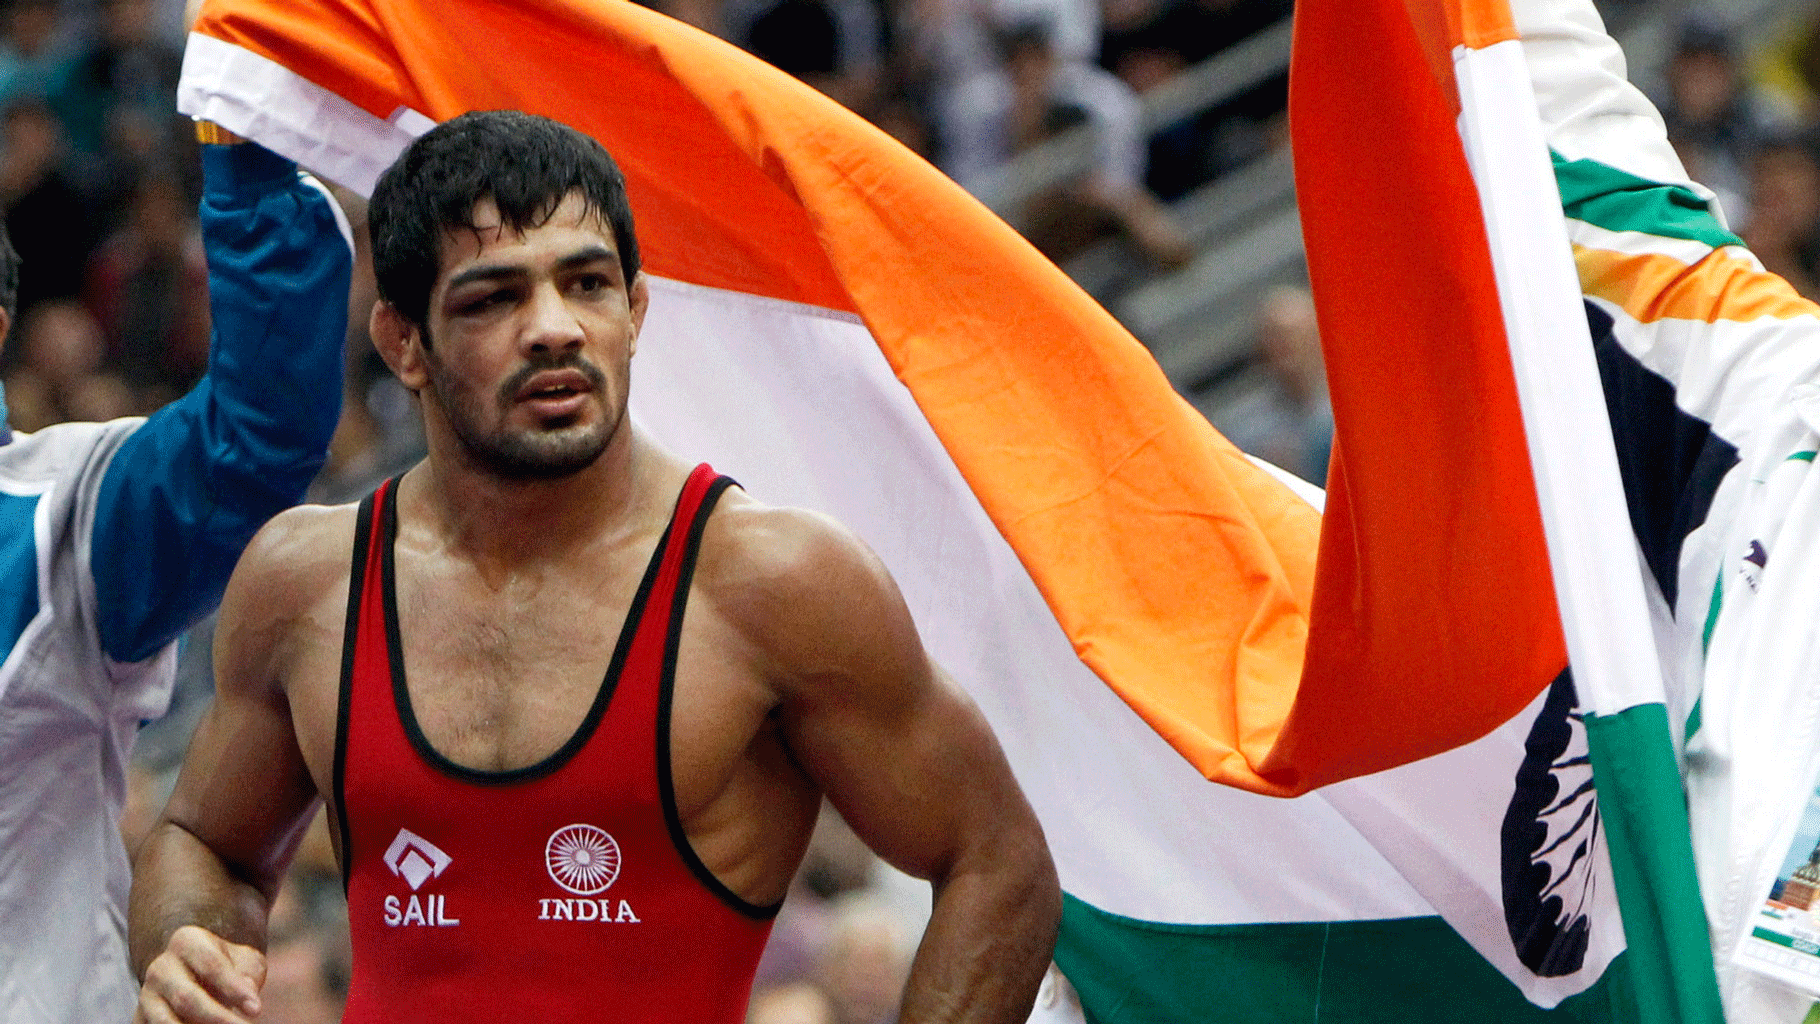 File photo of Sushil Kumar who will try to defend his CWG gold today in Gold Coast.